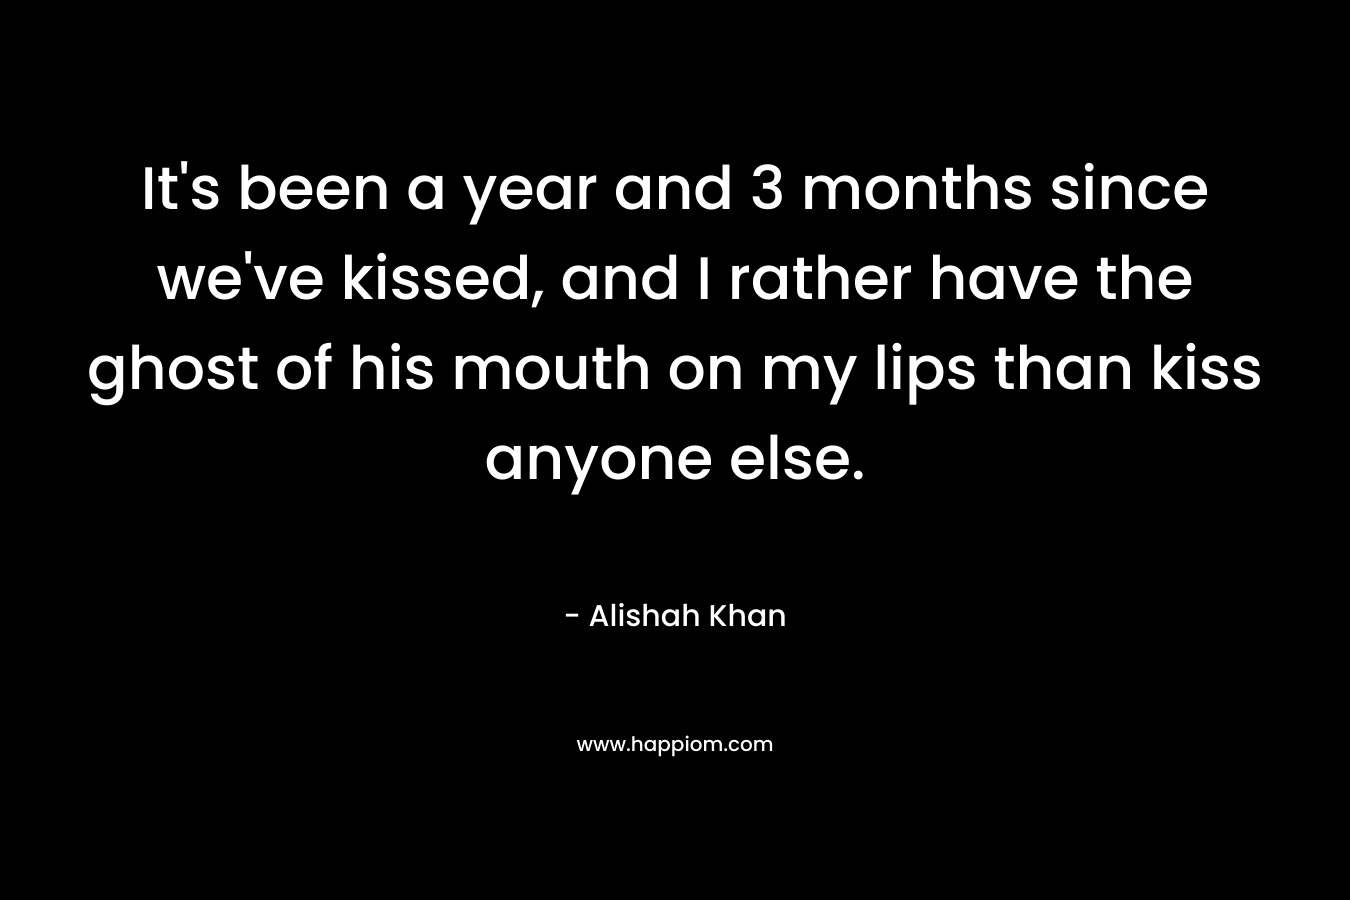 It's been a year and 3 months since we've kissed, and I rather have the ghost of his mouth on my lips than kiss anyone else.